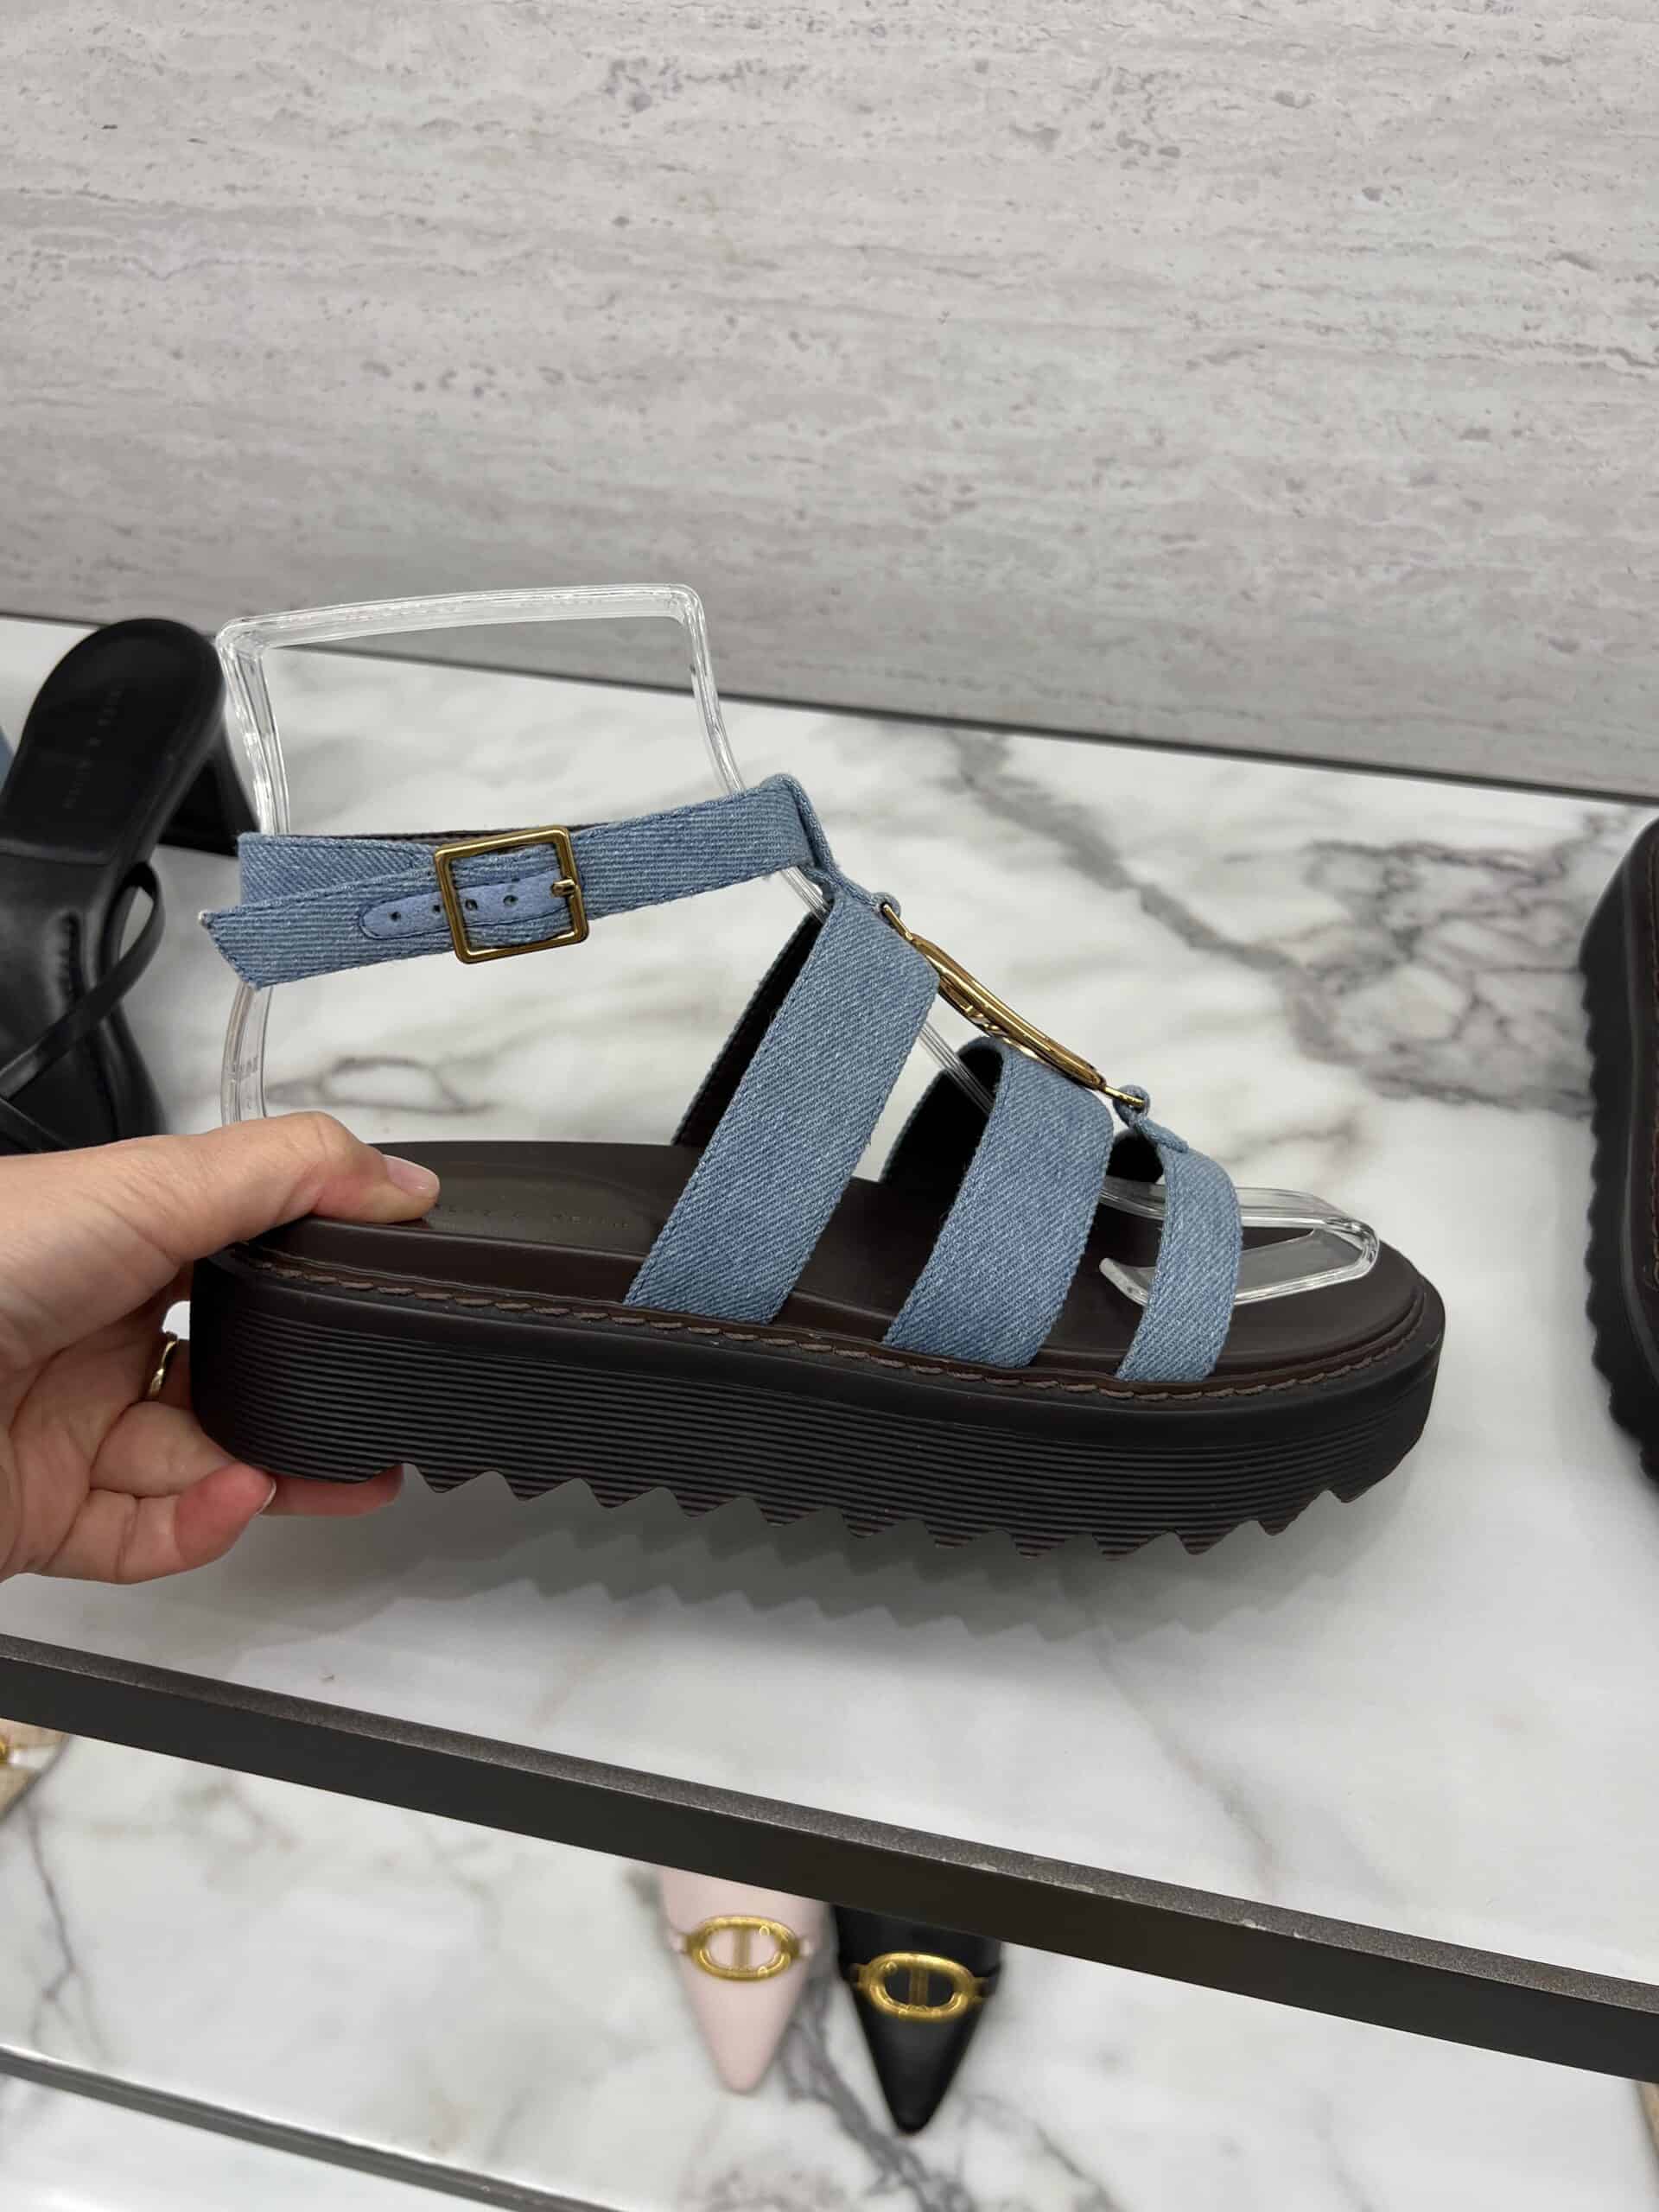 retail women ss23 flat sandals caged sporty flatform cleated leather denim metals black blue white charleskeith 2